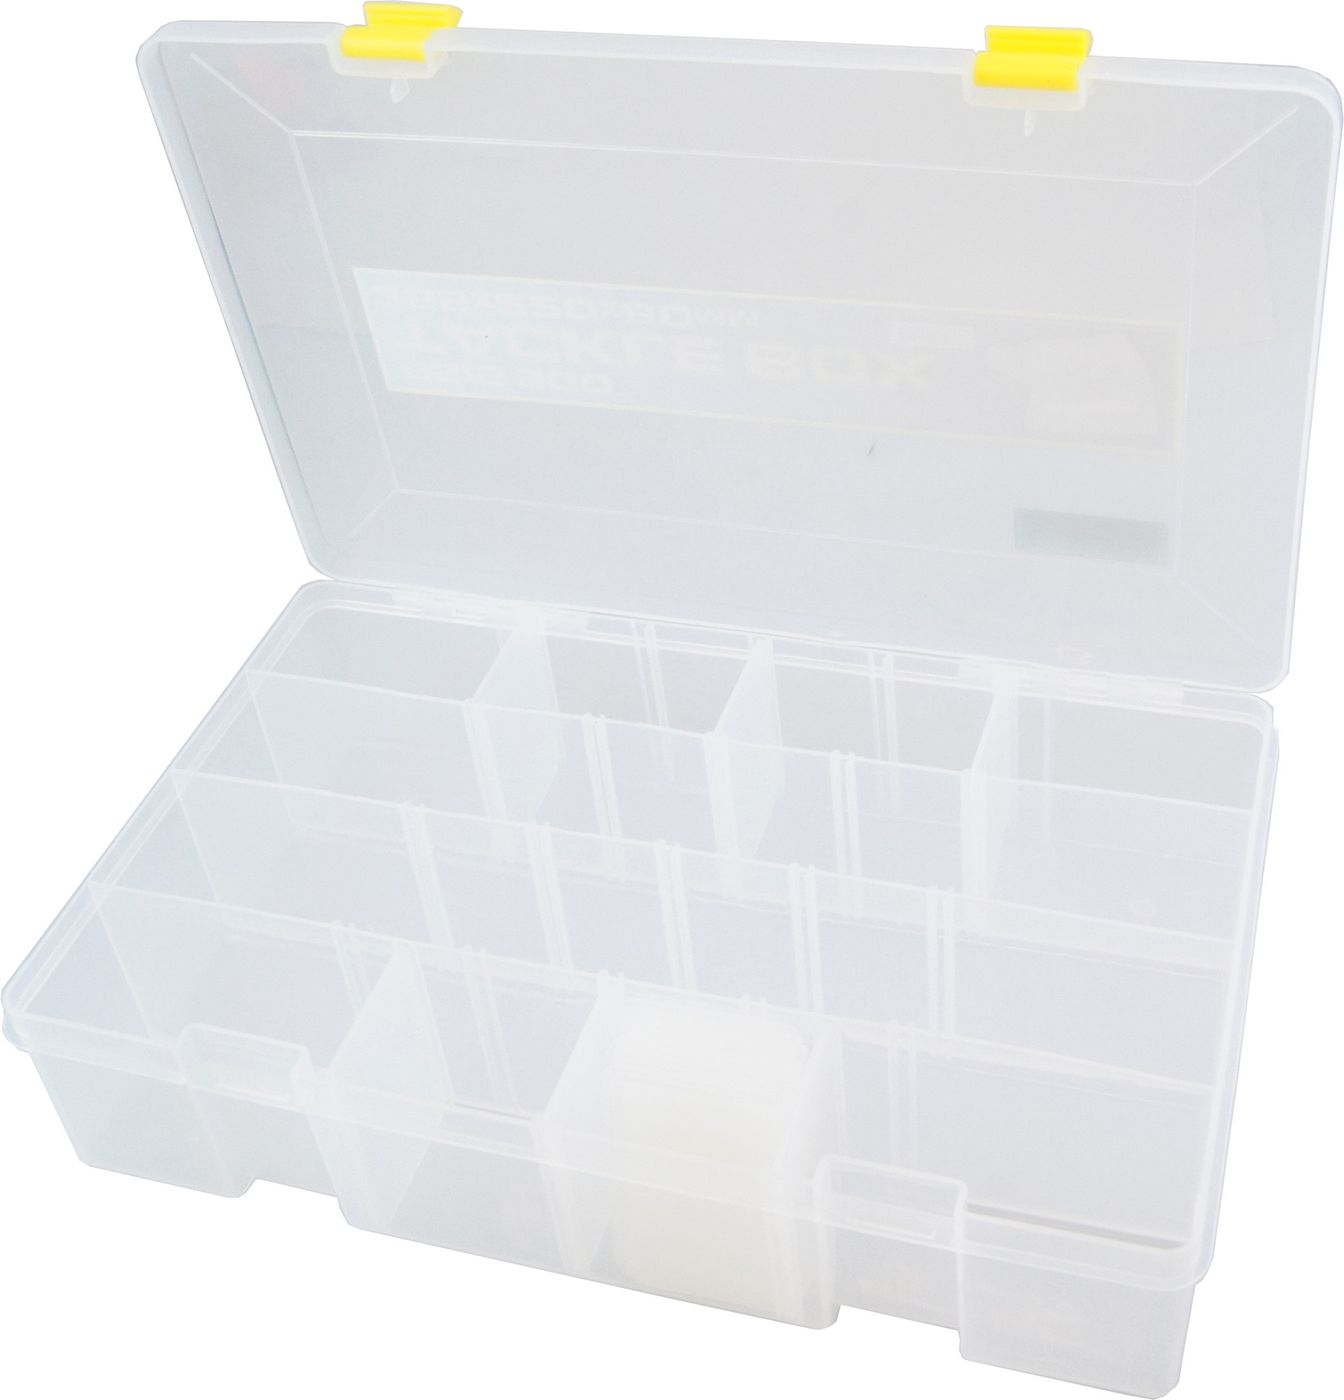 SPRO Tackle Box White